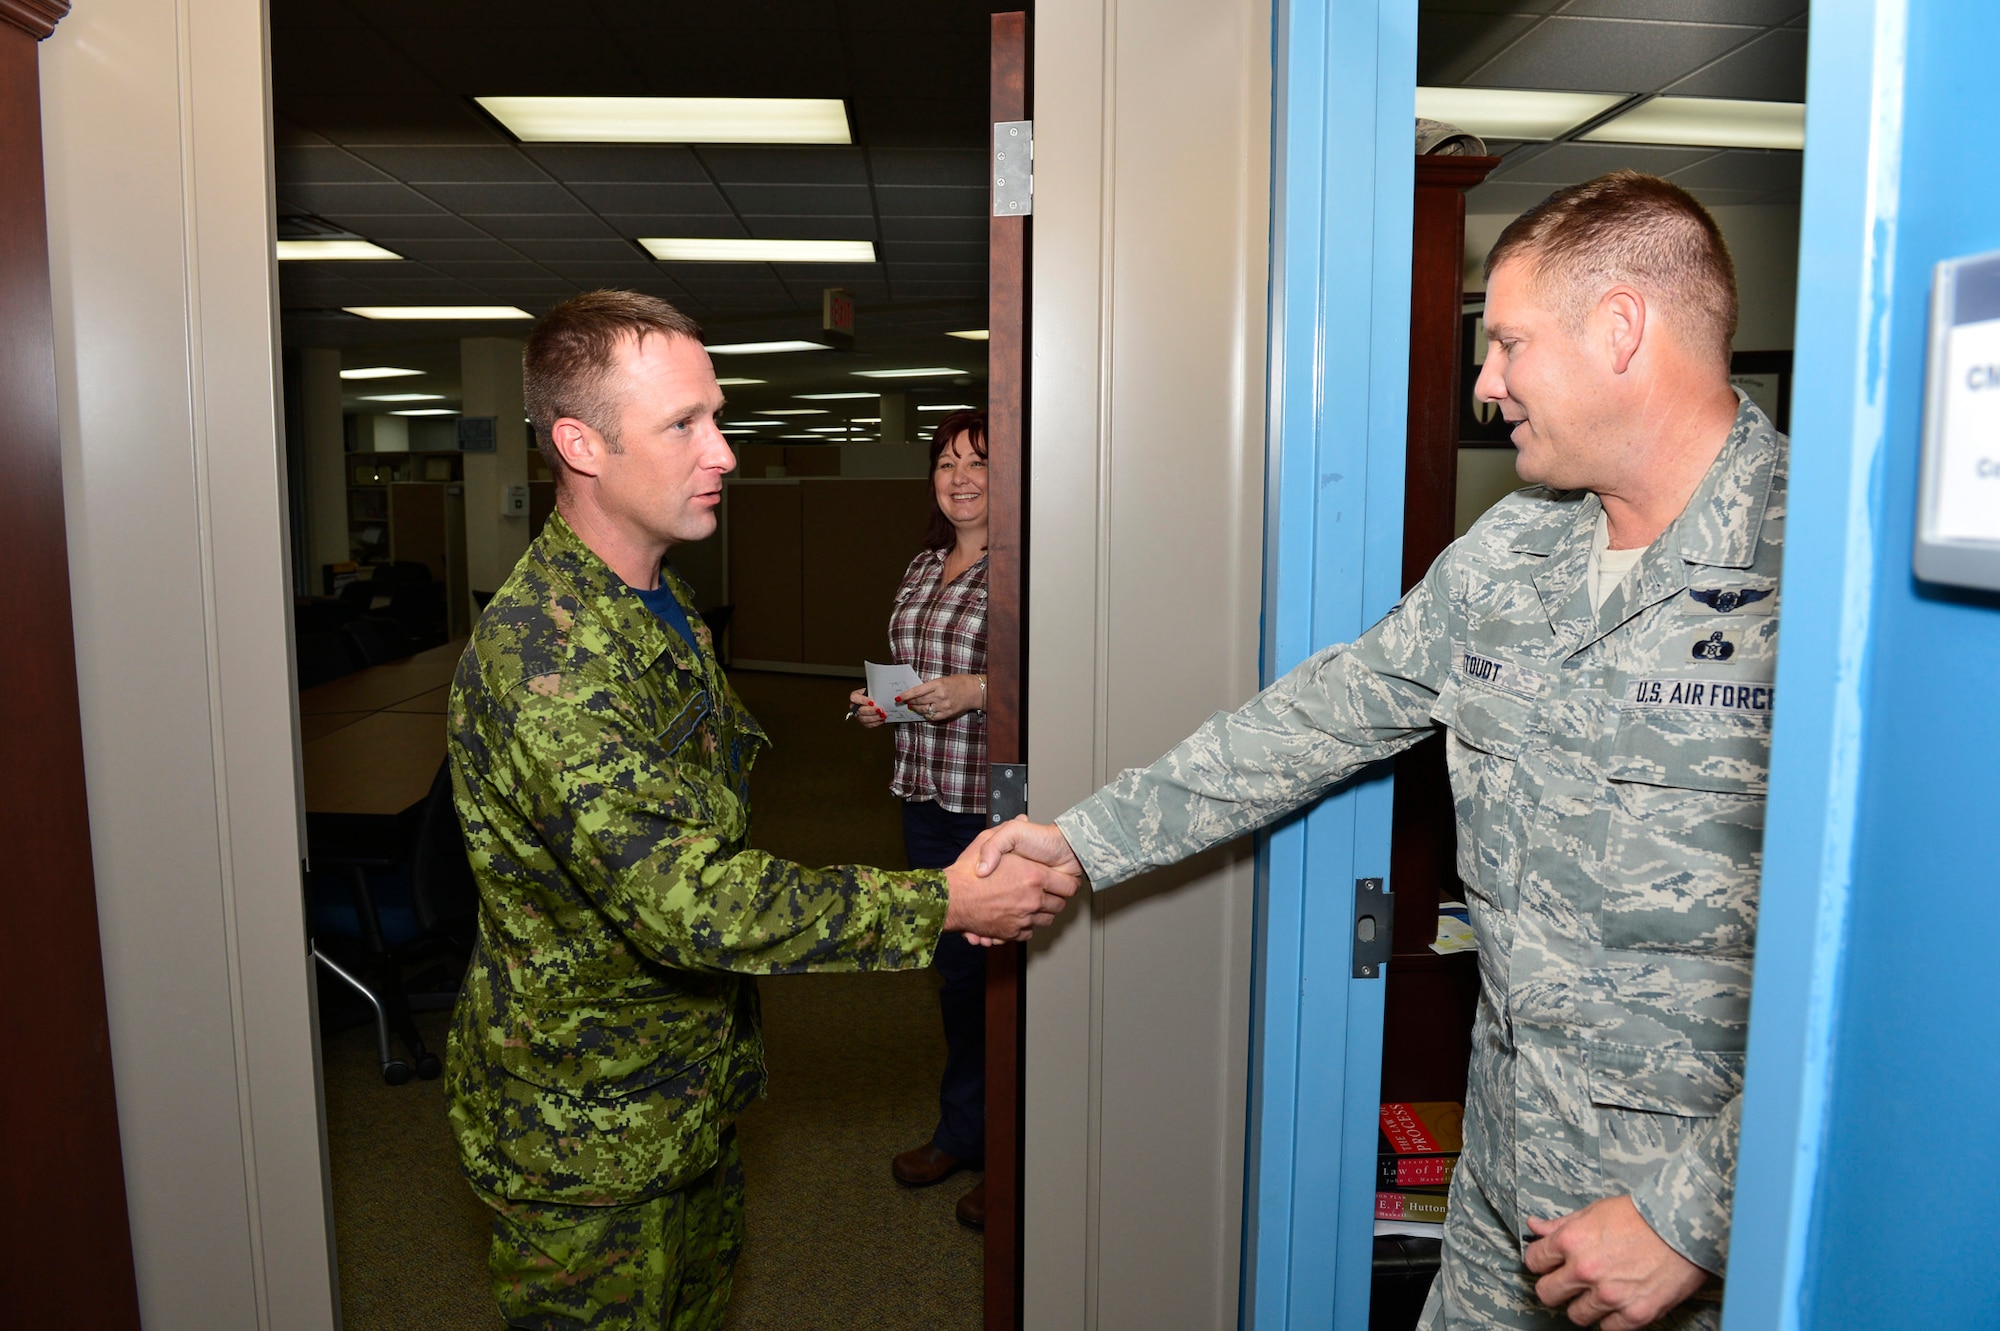 MCGHEE TYSON AIR NATIONAL GUARD BASE, Tenn.  - Canadian Sergeant Brian Standing shakes hands with Chief Master Sgt. Thomas "TK" Stoudt, commandant of the Paul H. Lankford Enlisted PME Center here Oct. 6, 2014, at the I.G. Brown Training and Education Center. Standing was attending U.S. Air Force NCO Academy and interviewed for the Commandant Award. (U.S. Air National Guard photo by Master Sgt. Jerry Harlan/Released)